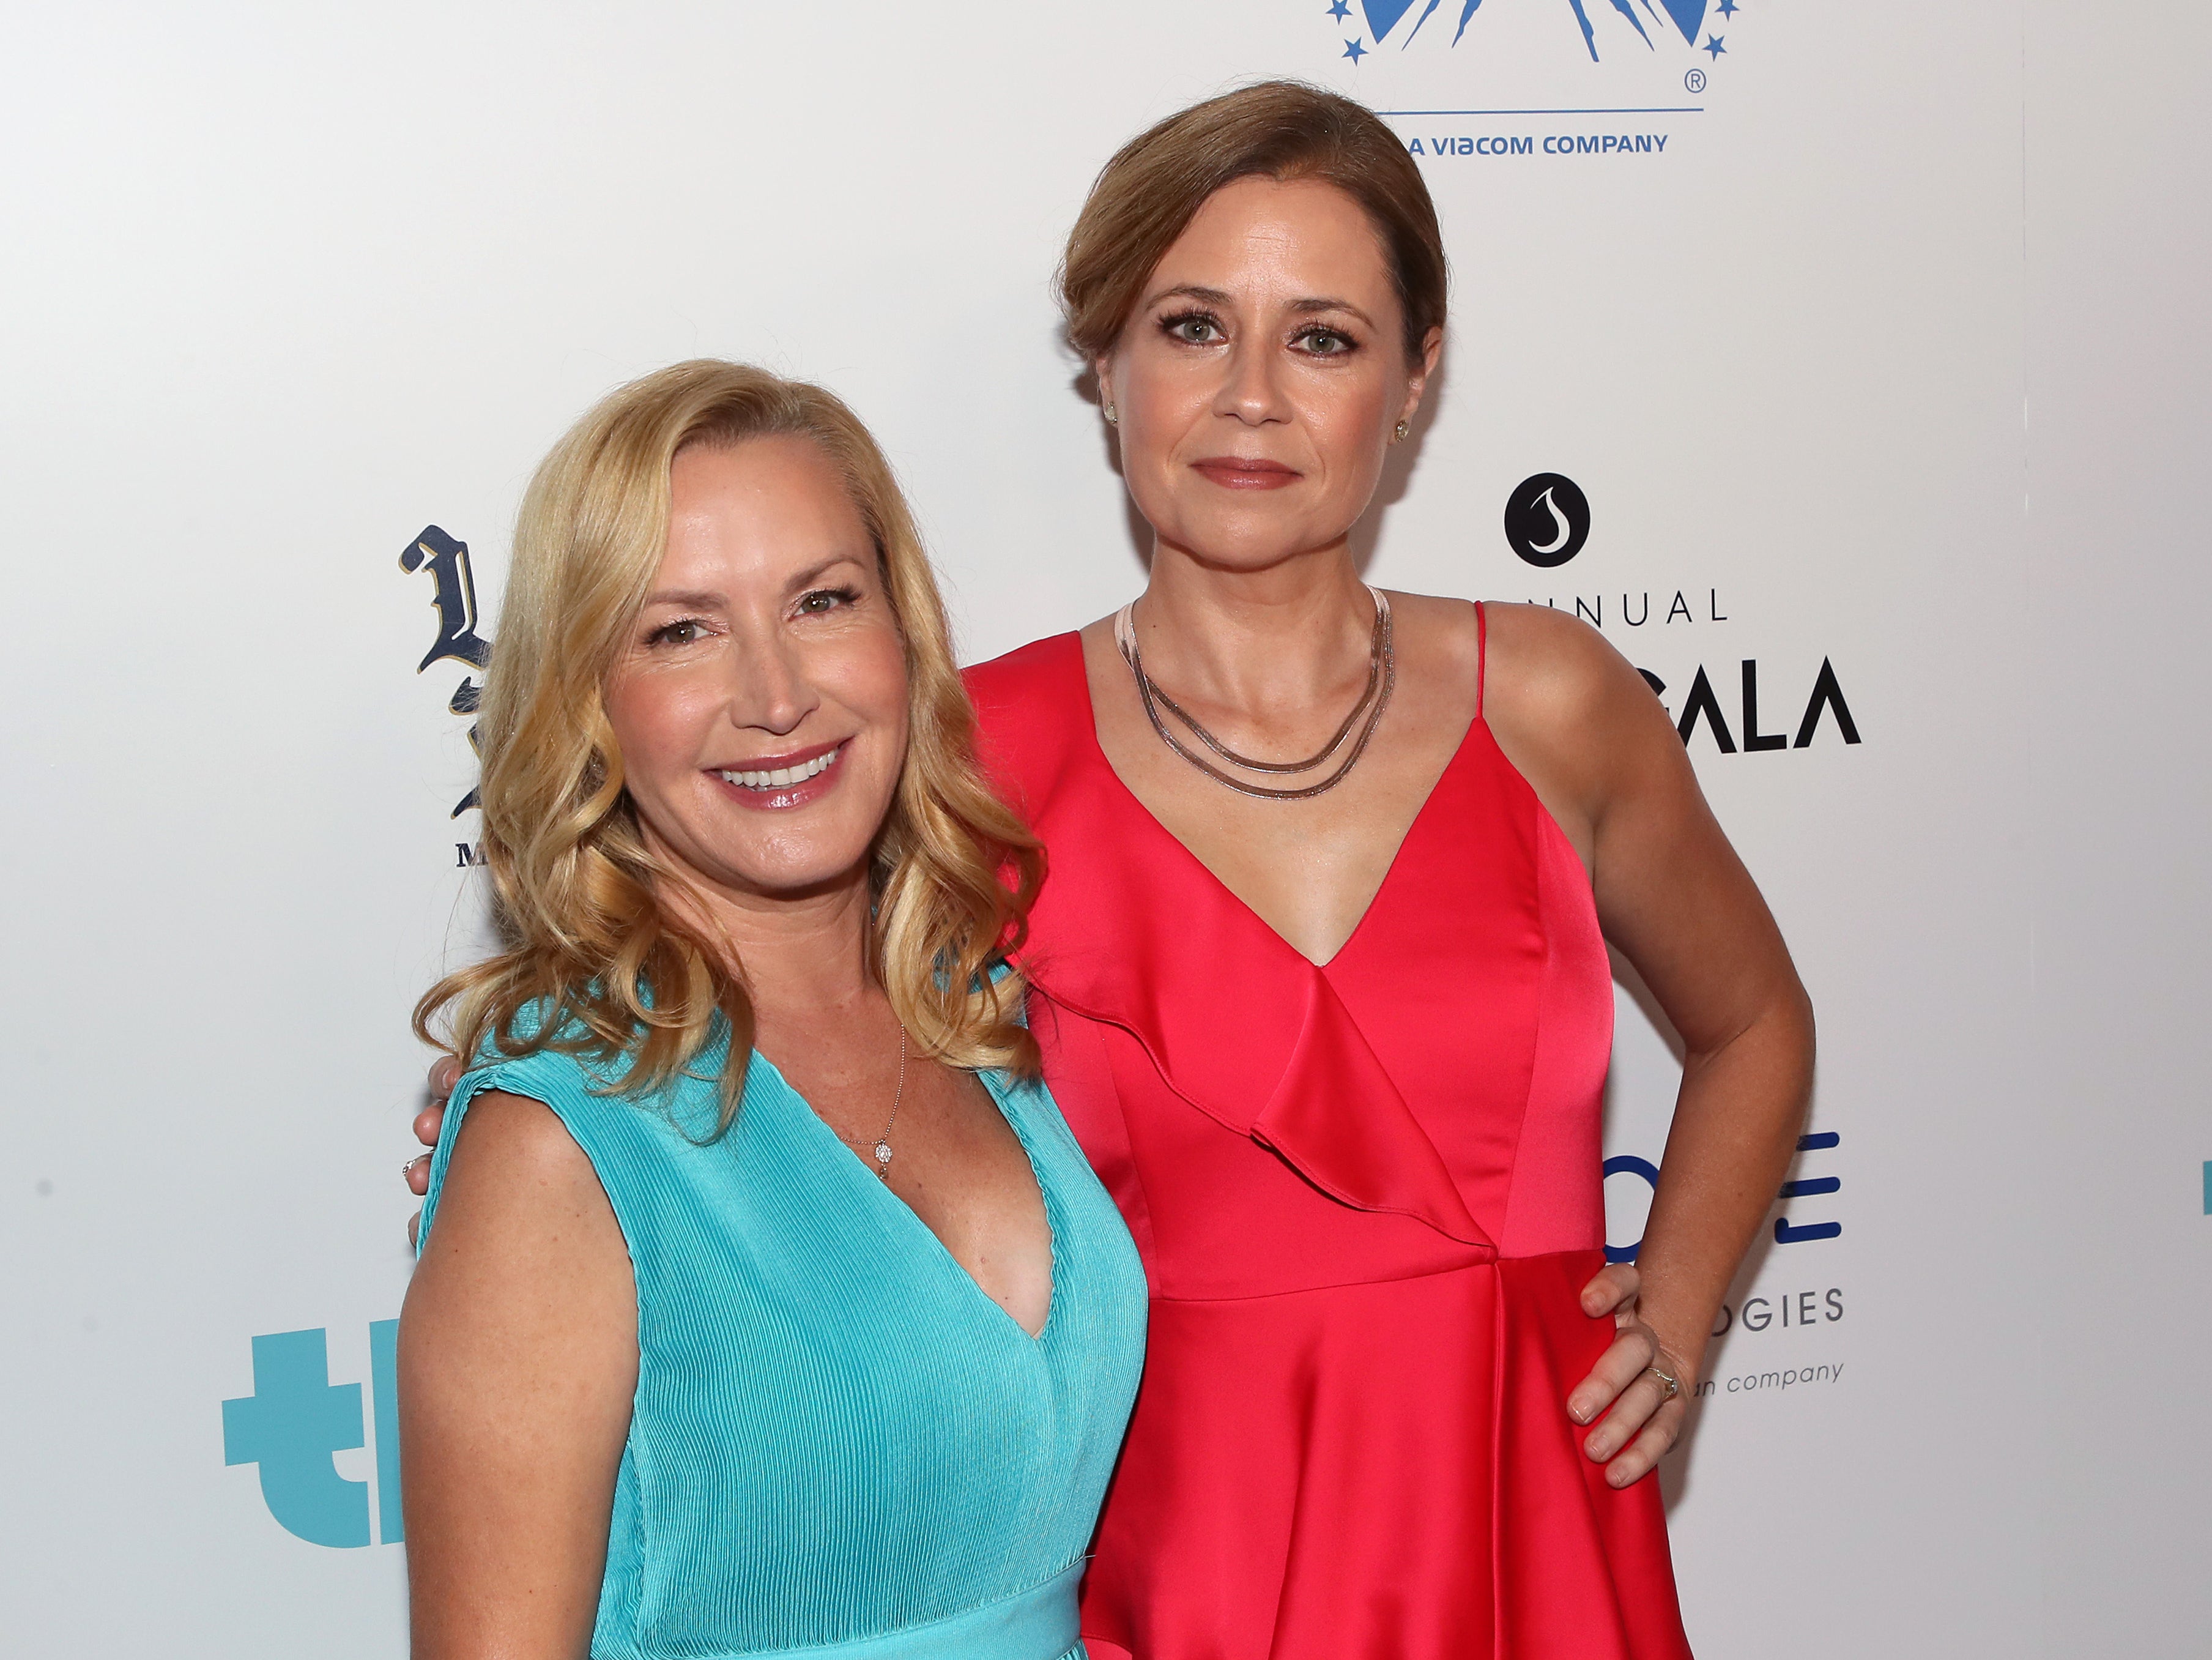 The Office US stars Angela Kinsey (left) and Jenna Fischer turned their off-screen friendship into a podcast